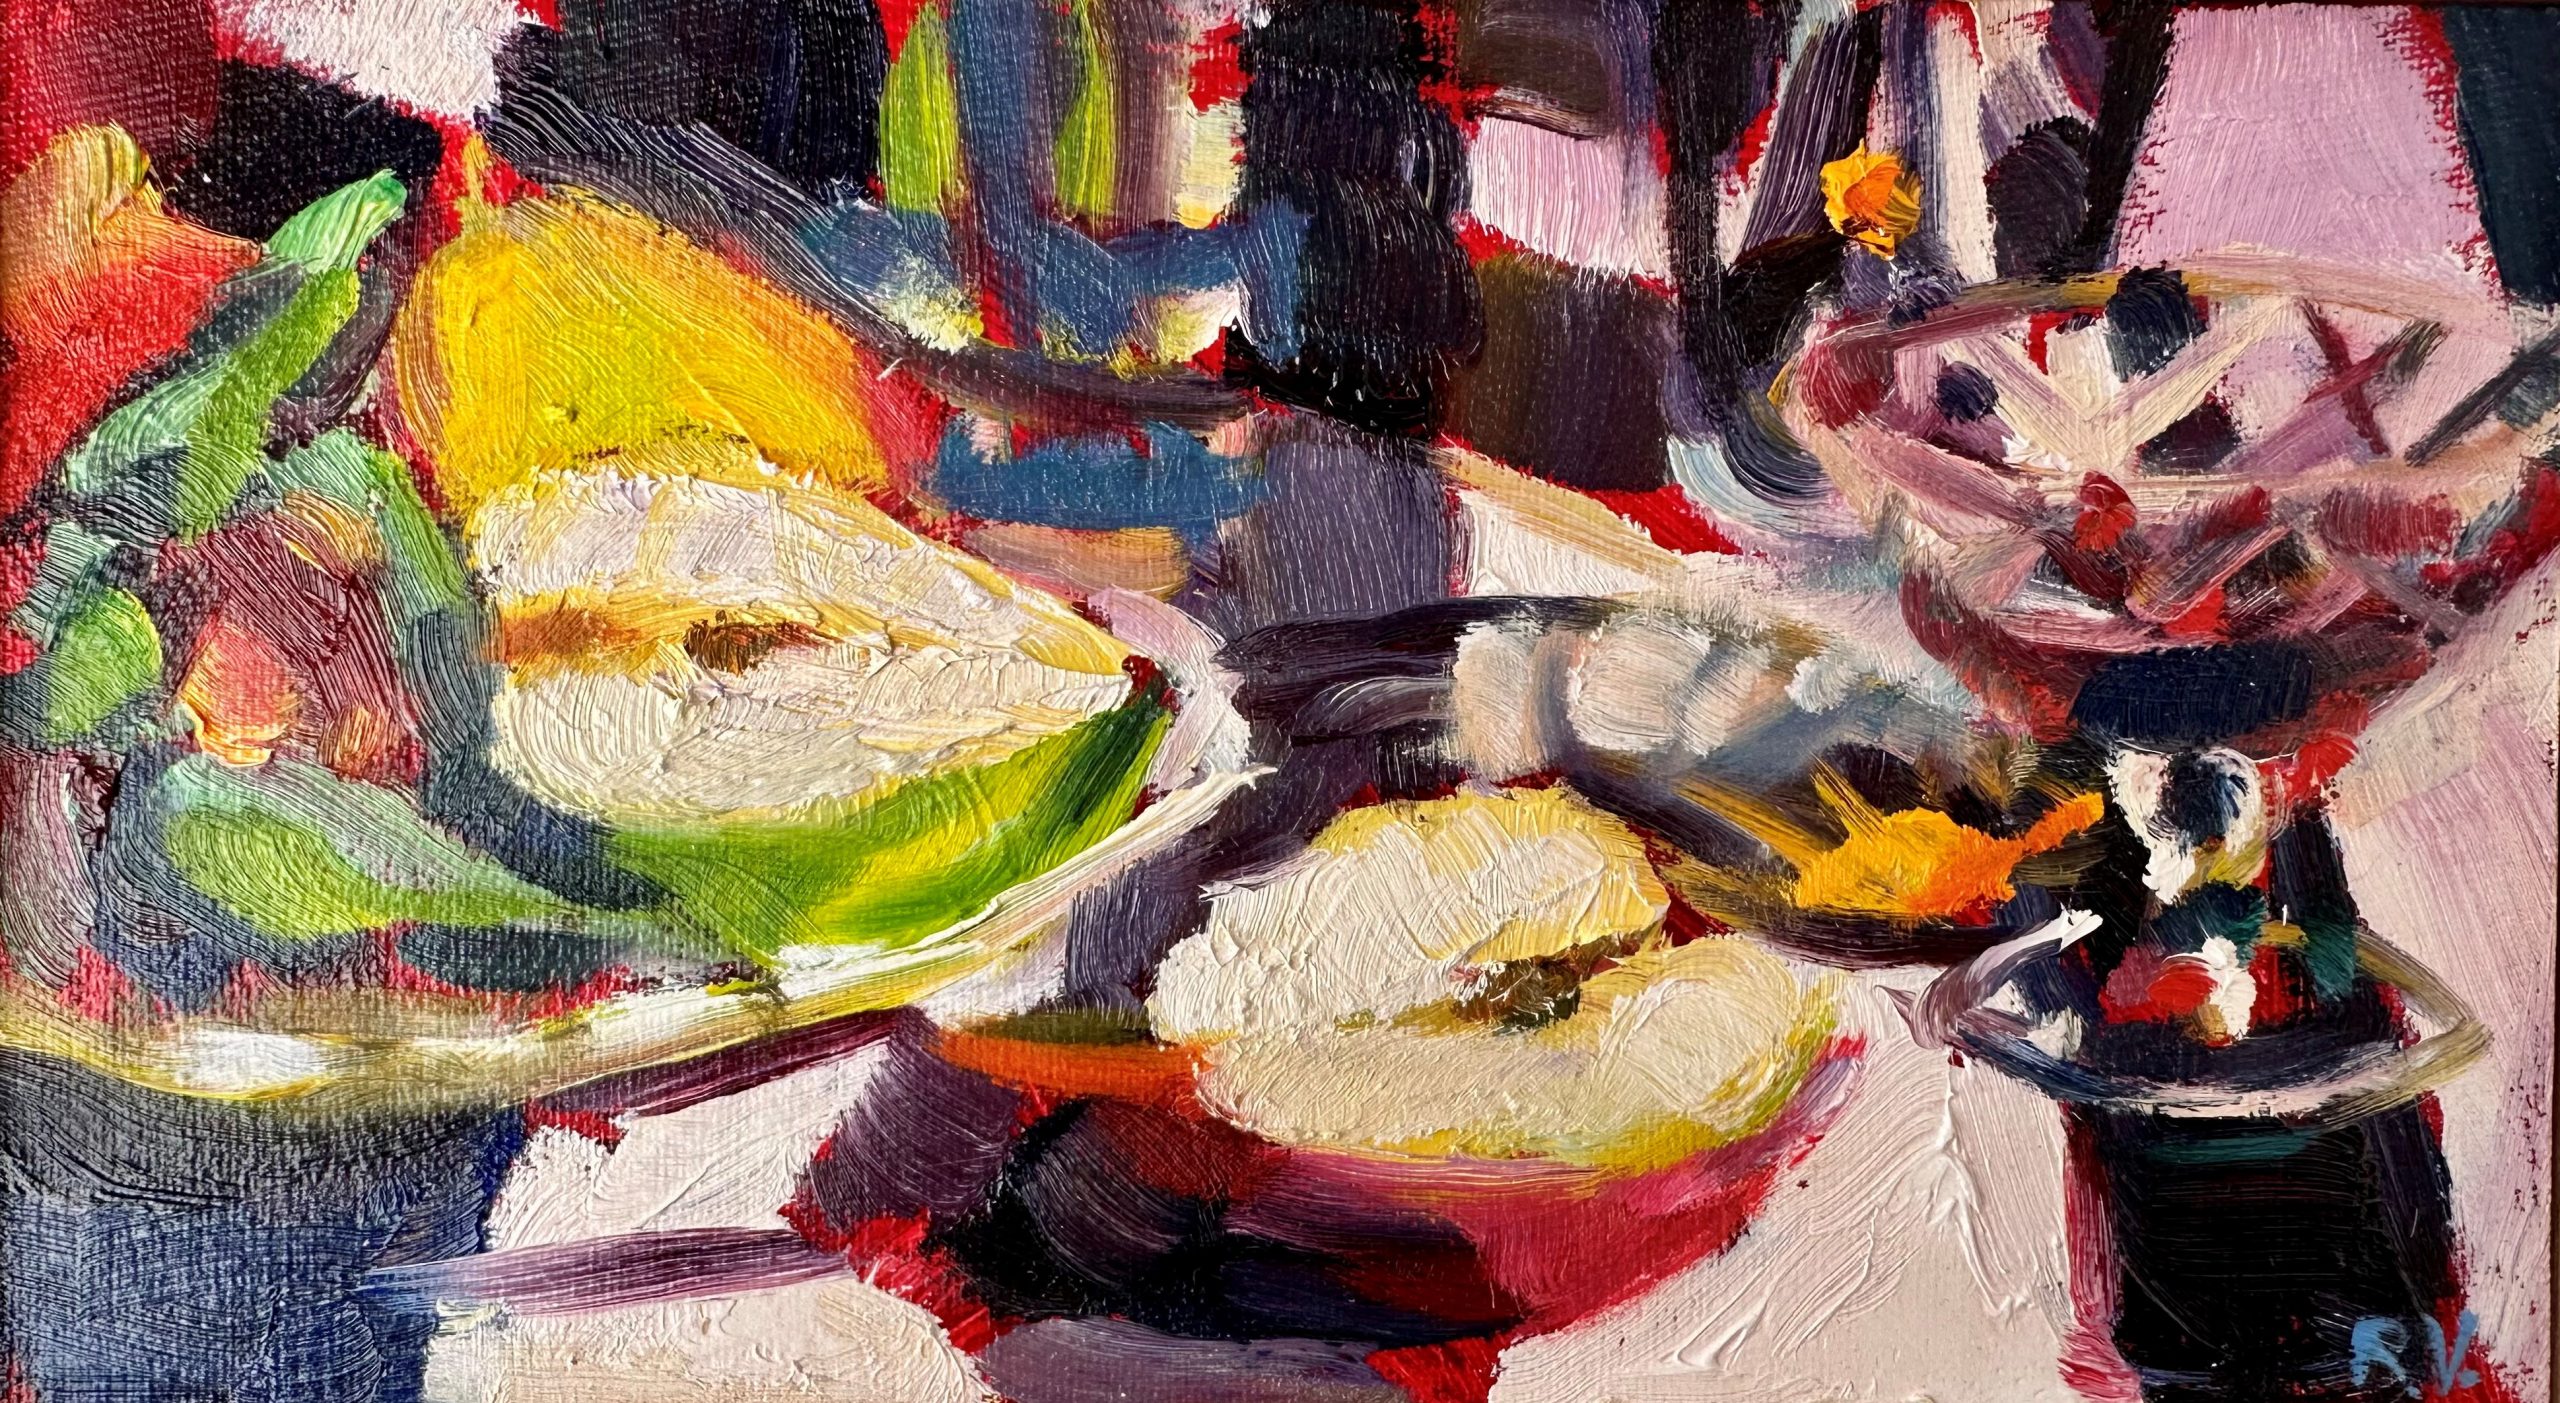 Rosemary Valadon 'Apples and Aperol' oil on canvas 13 x 23cm $2,300